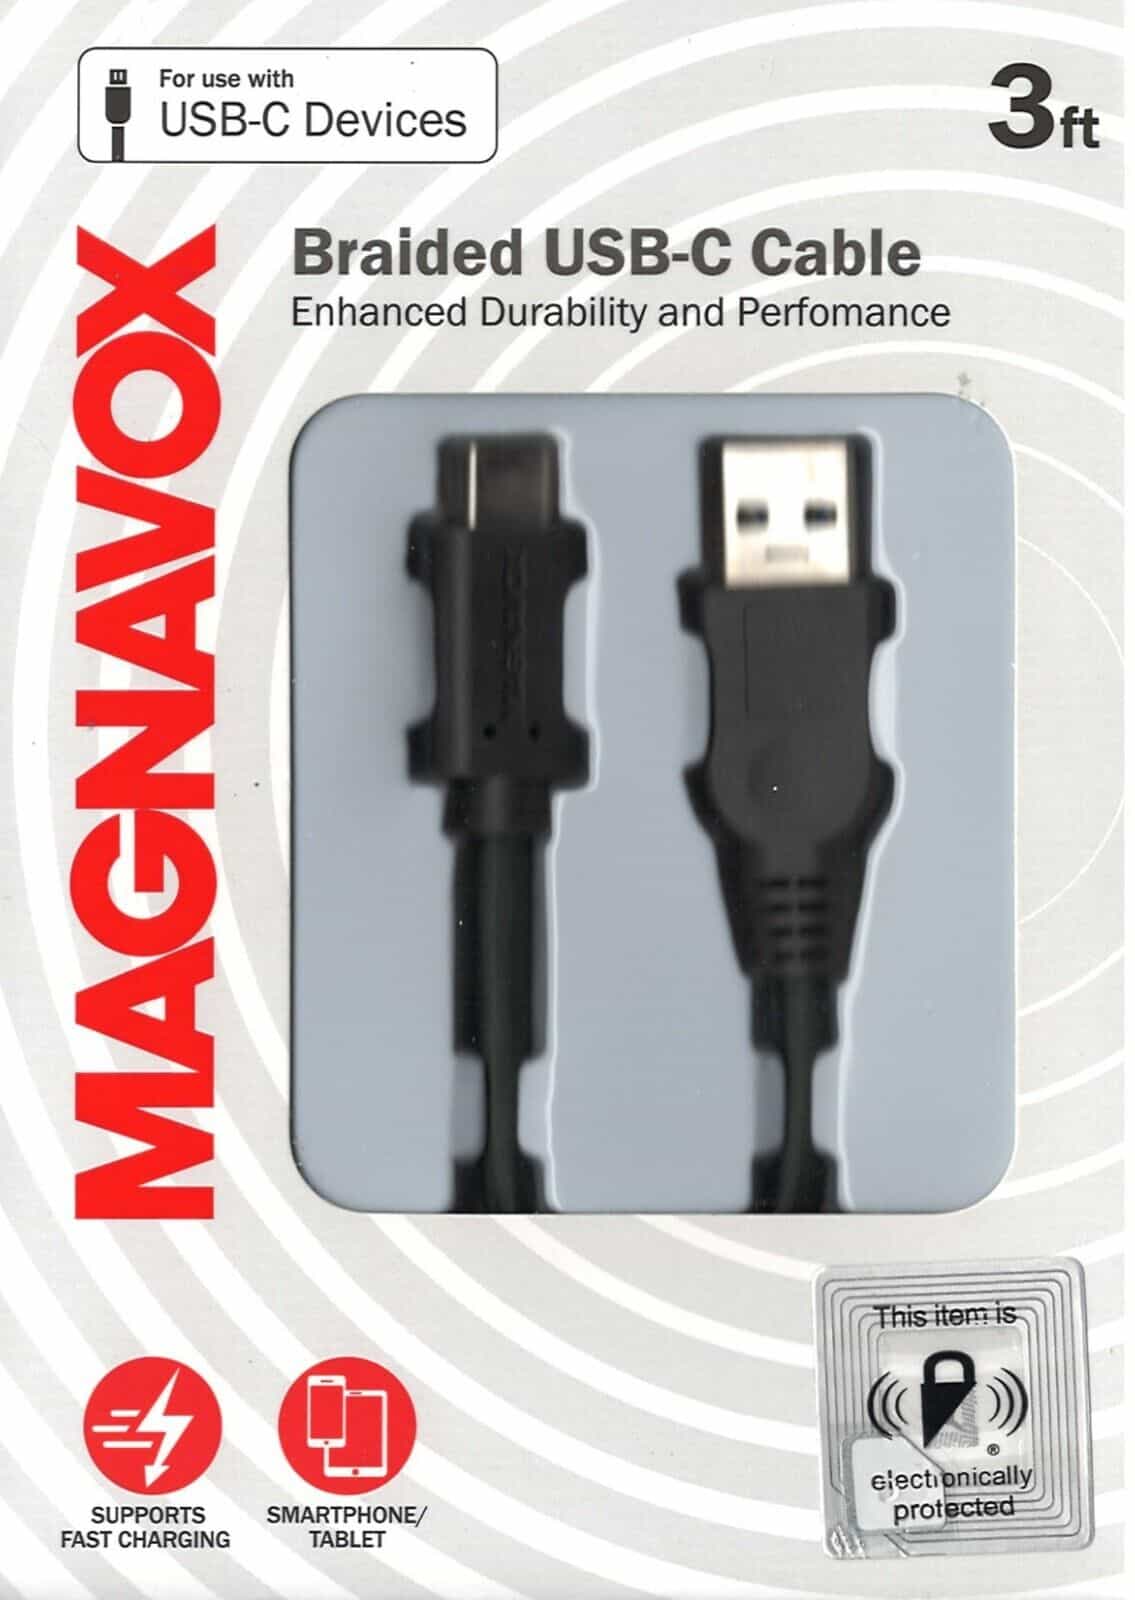 Magnavox Braided USB-C Cable 3ft For Android Phones and Tablets